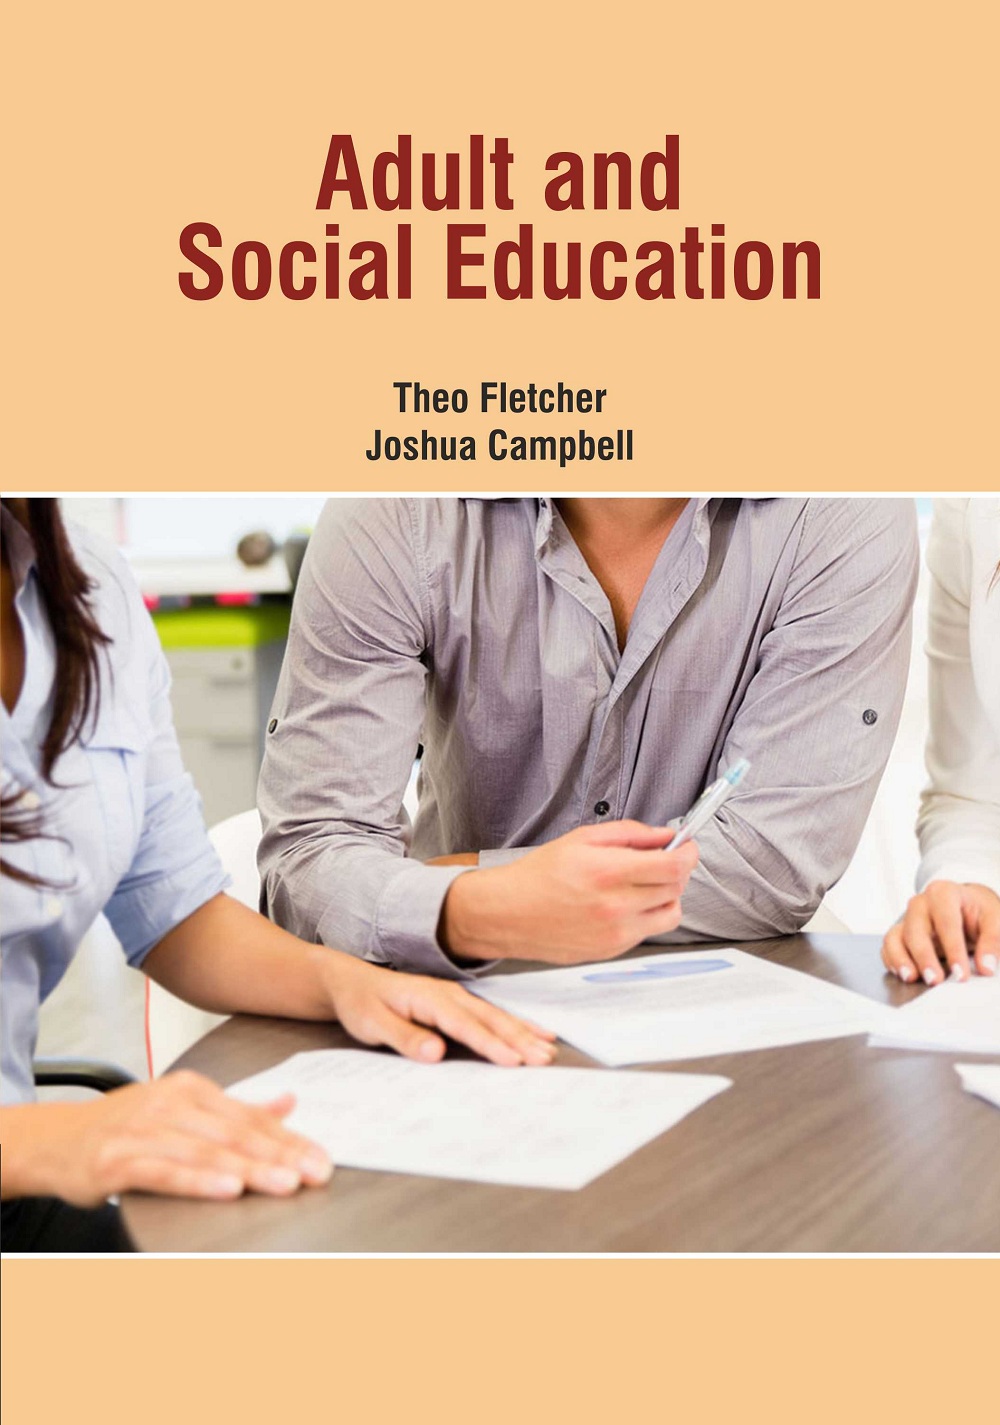 Adult and Social Education